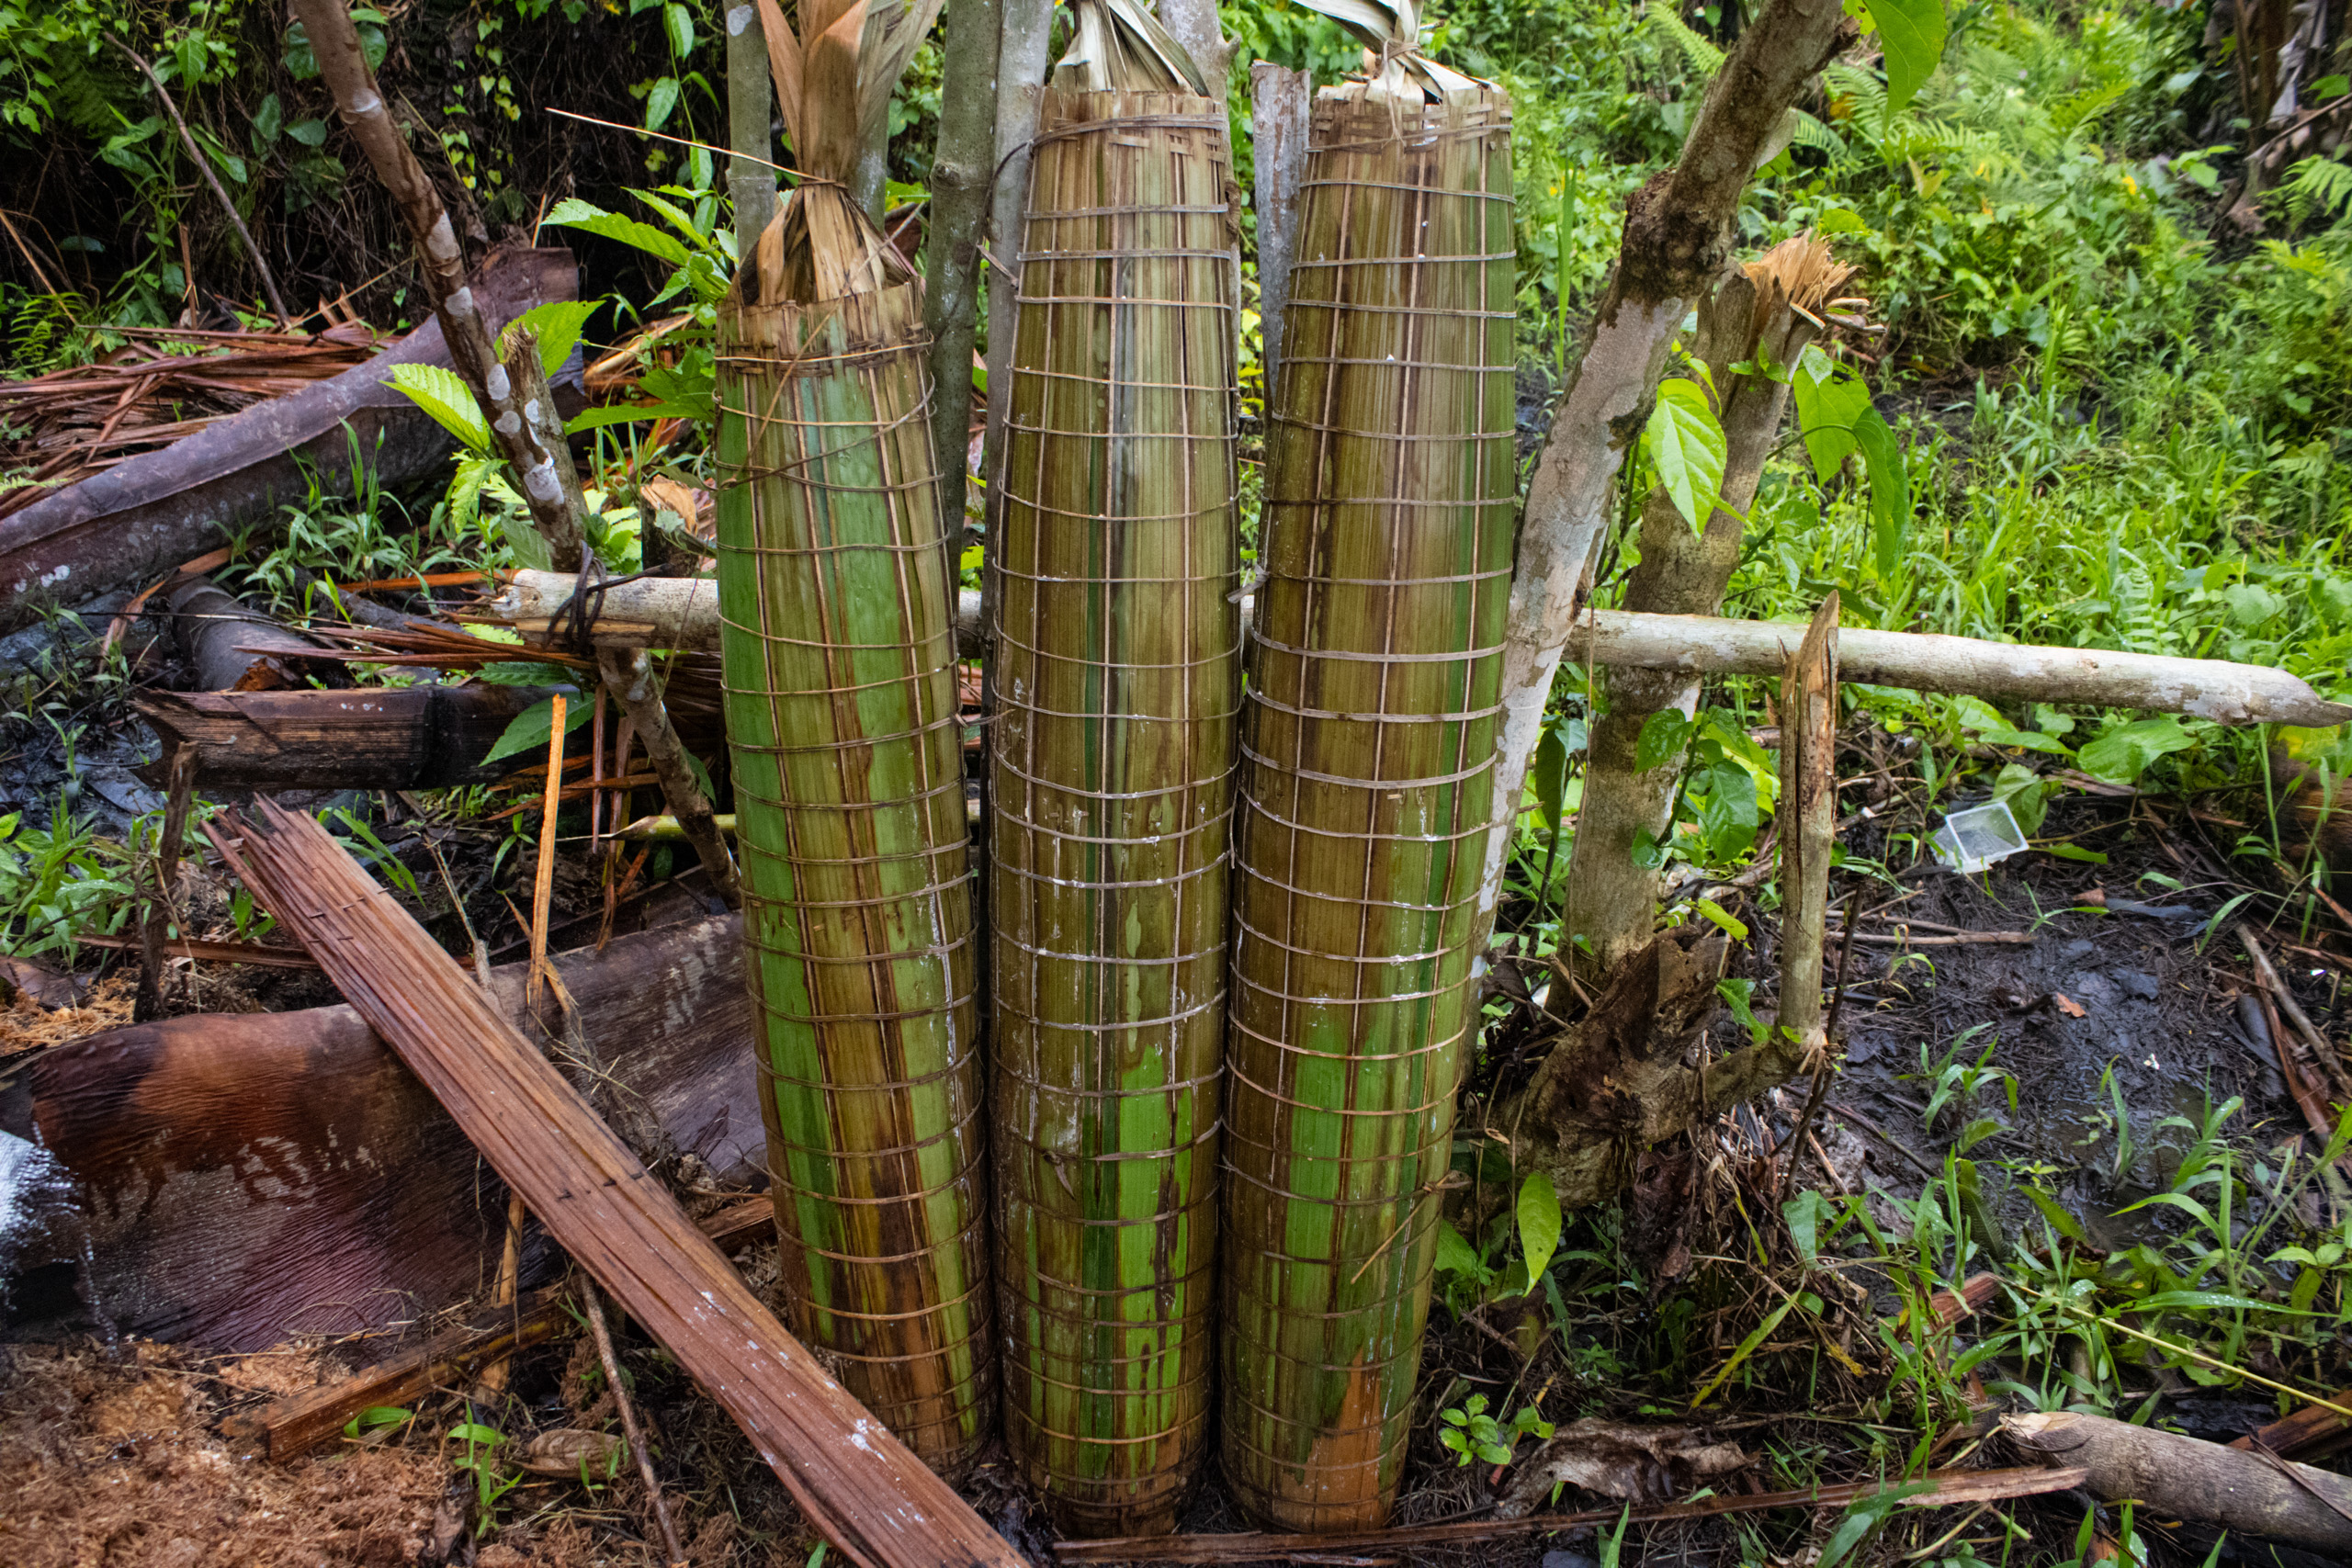 the still-moist starch is stored in containers, known as tumang, made from sago palm leaves